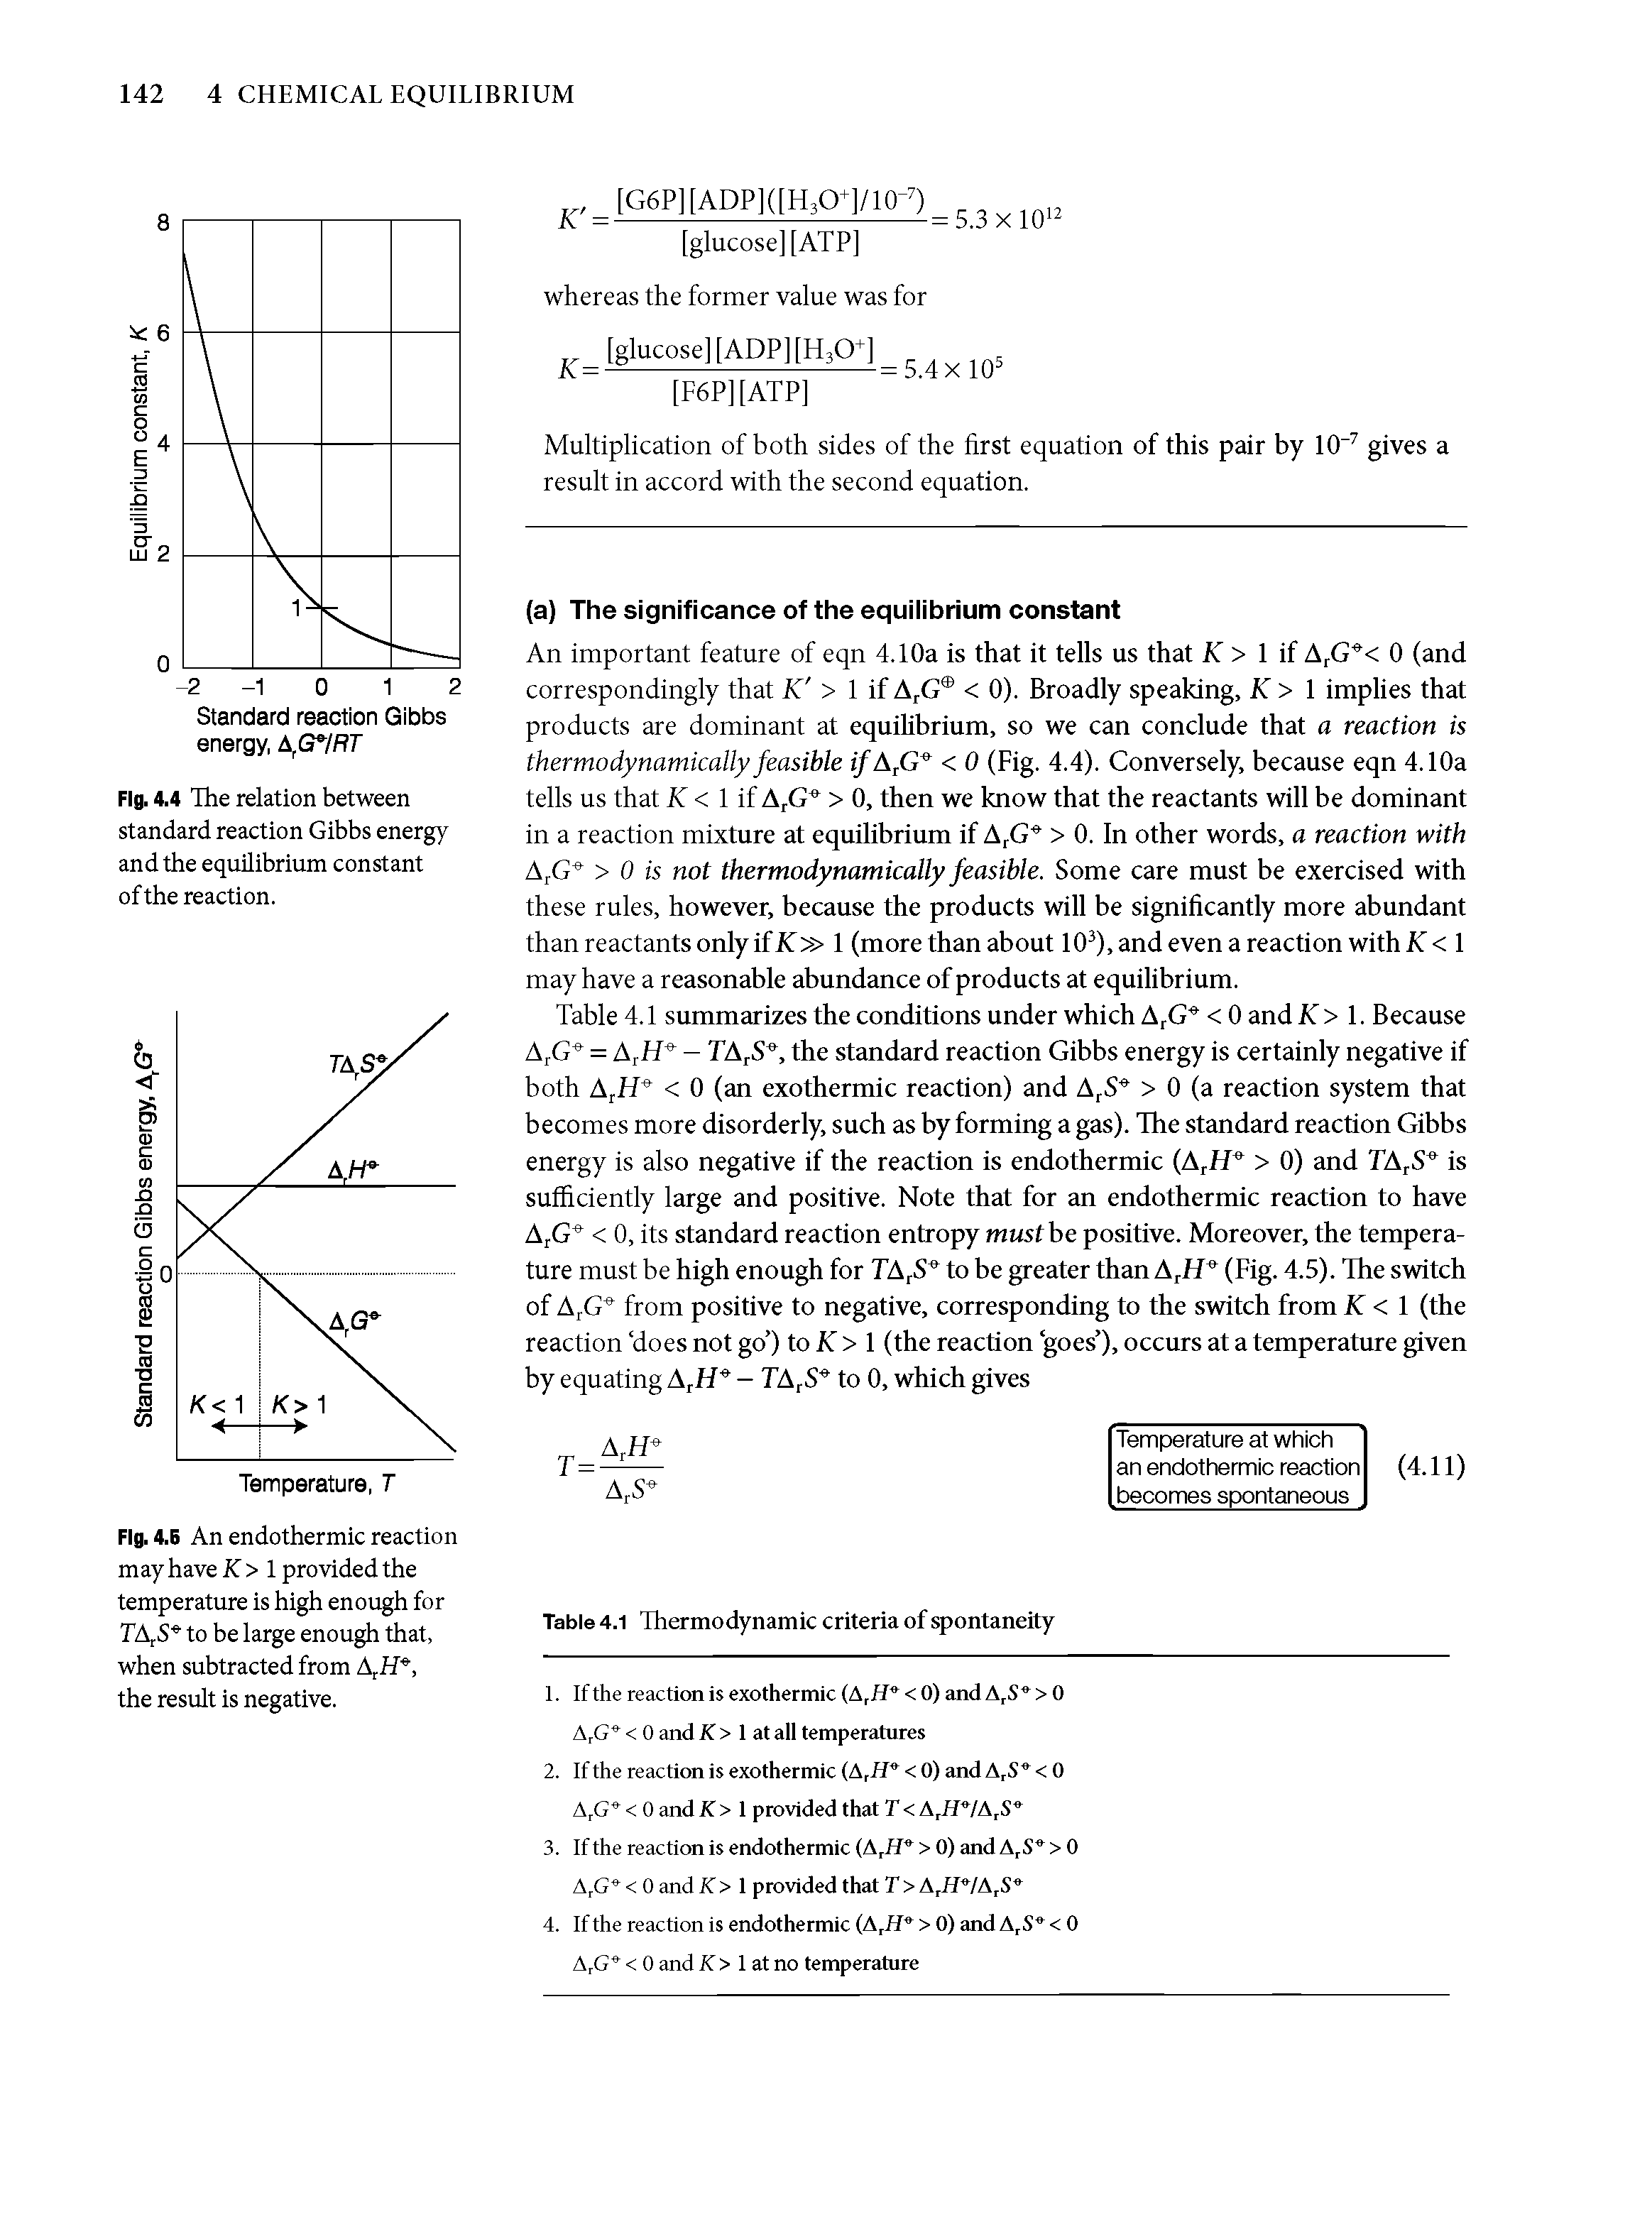 Fig. 4.4 The relation between standard reaction Gibbs energy and the equilibrium constant of the reaction.